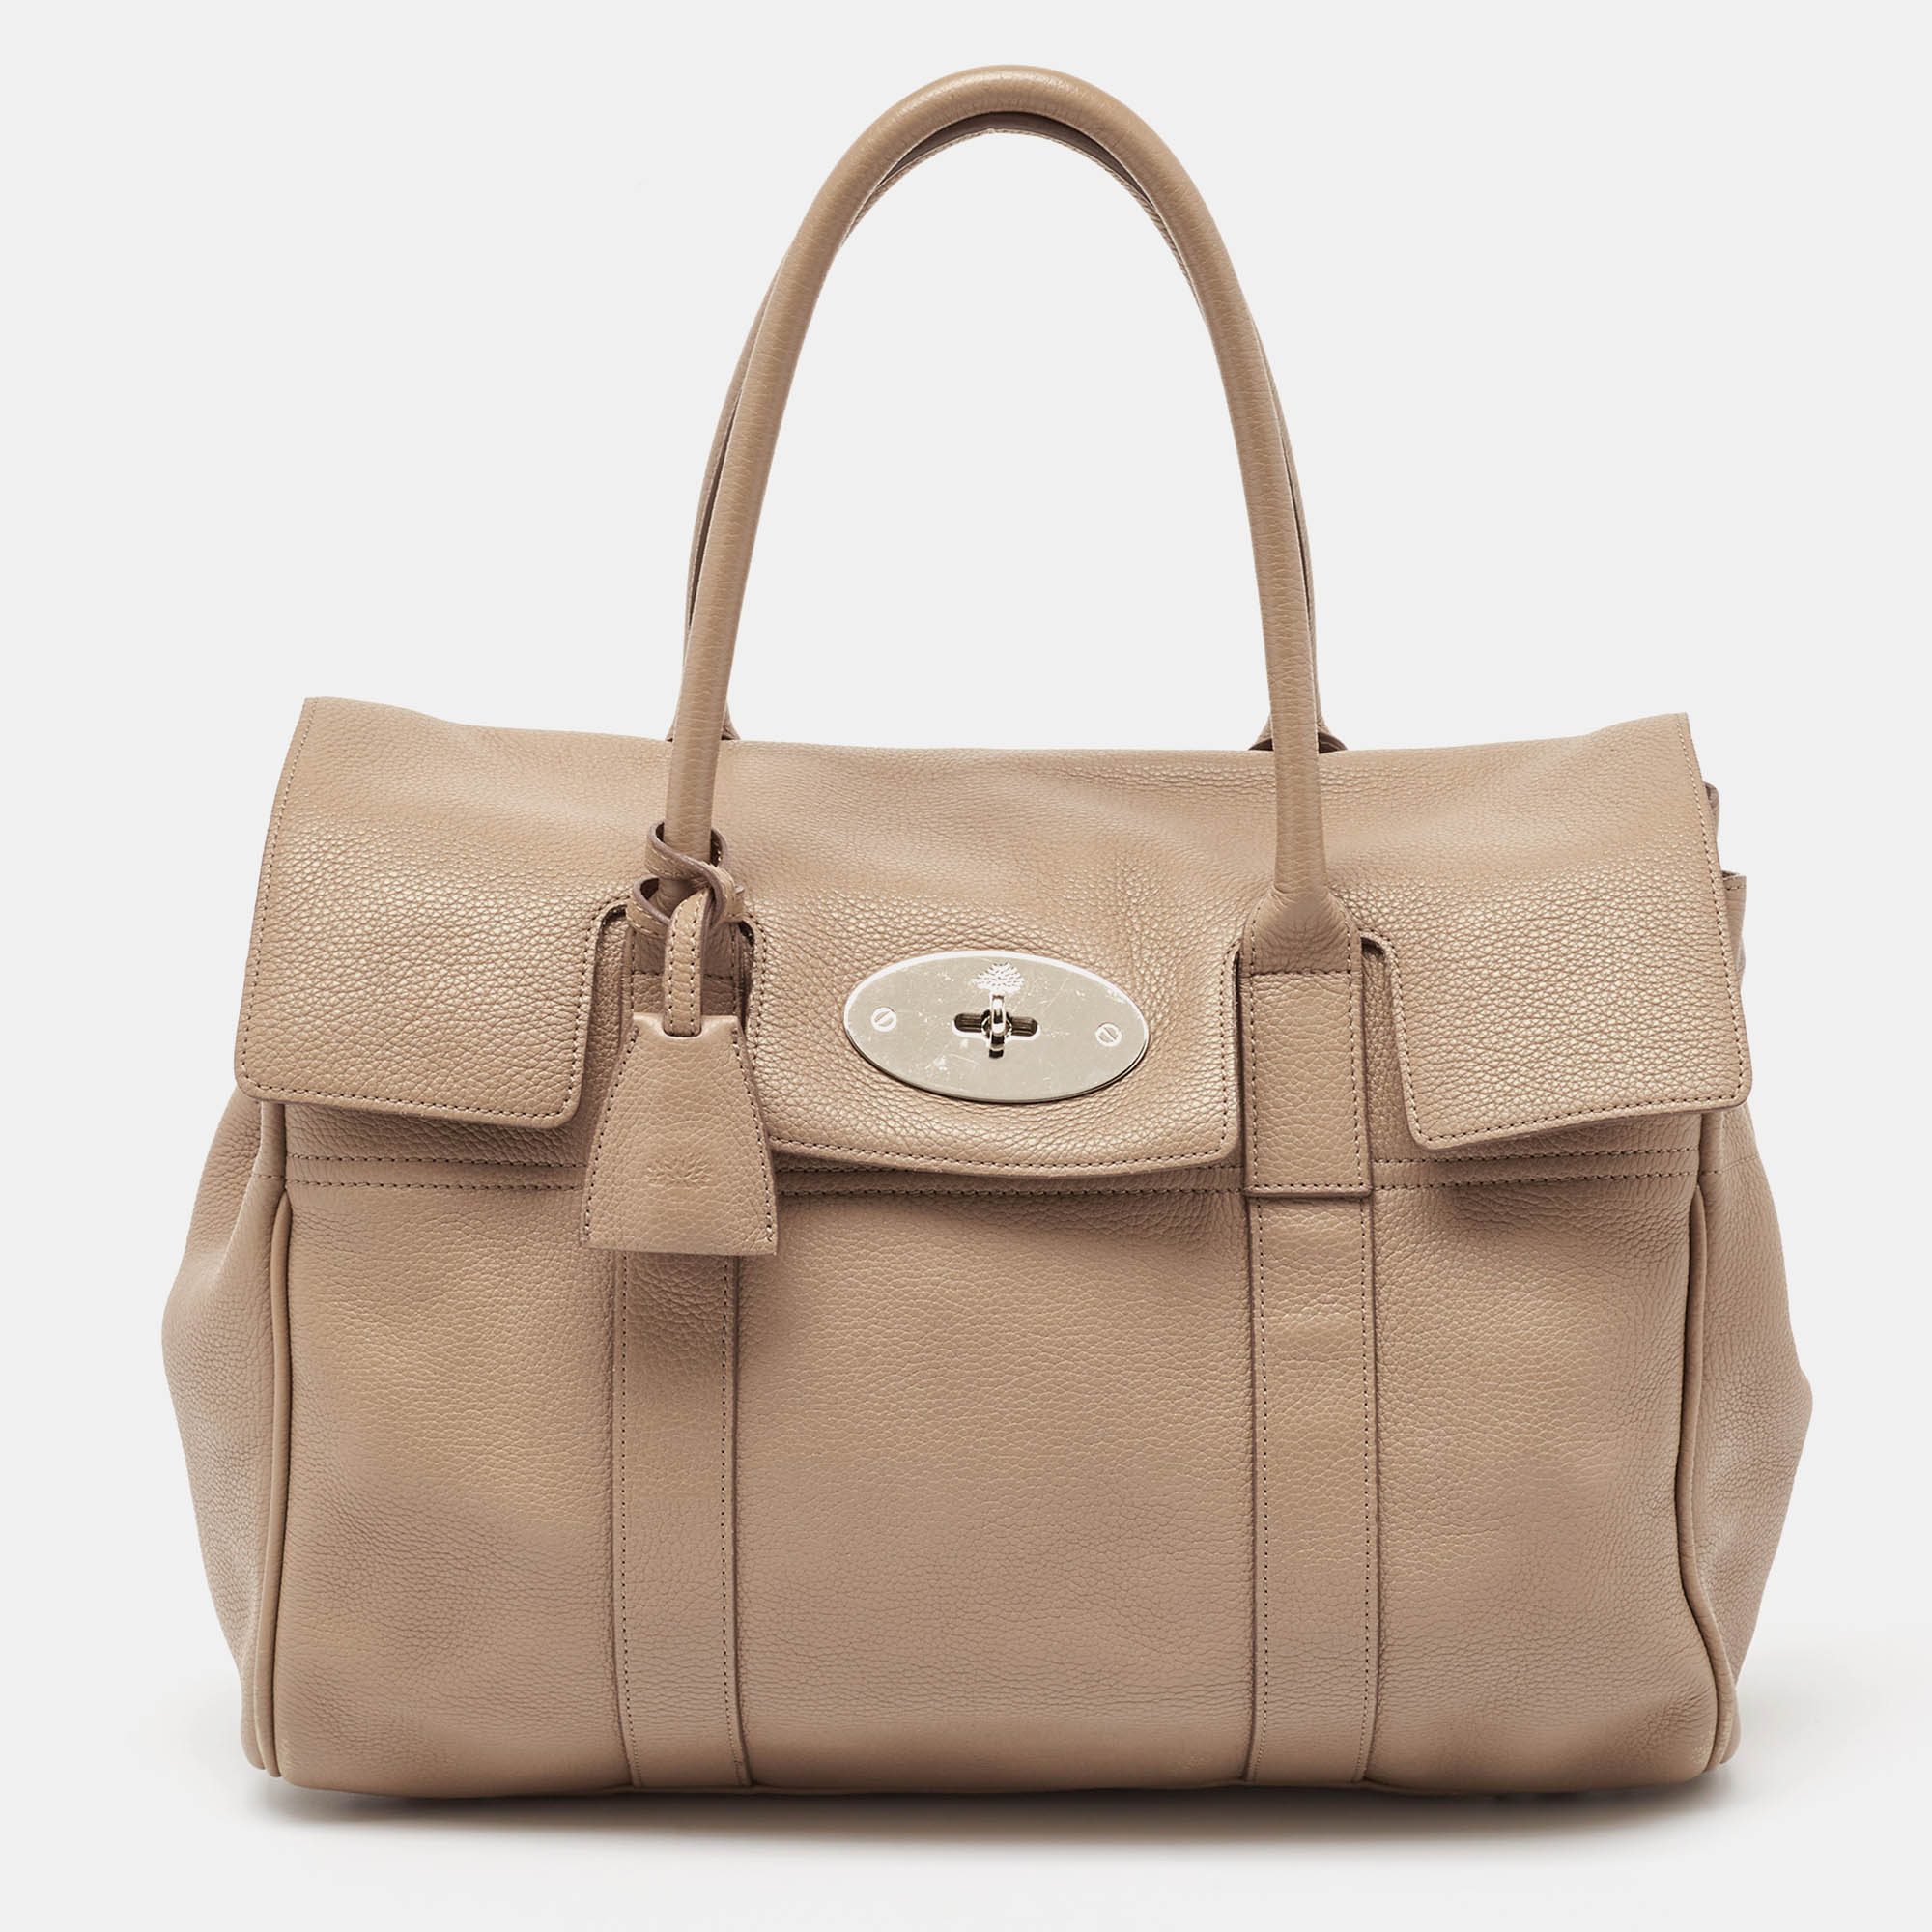 Pre-owned Mulberry Beige Leather Bayswater Satchel